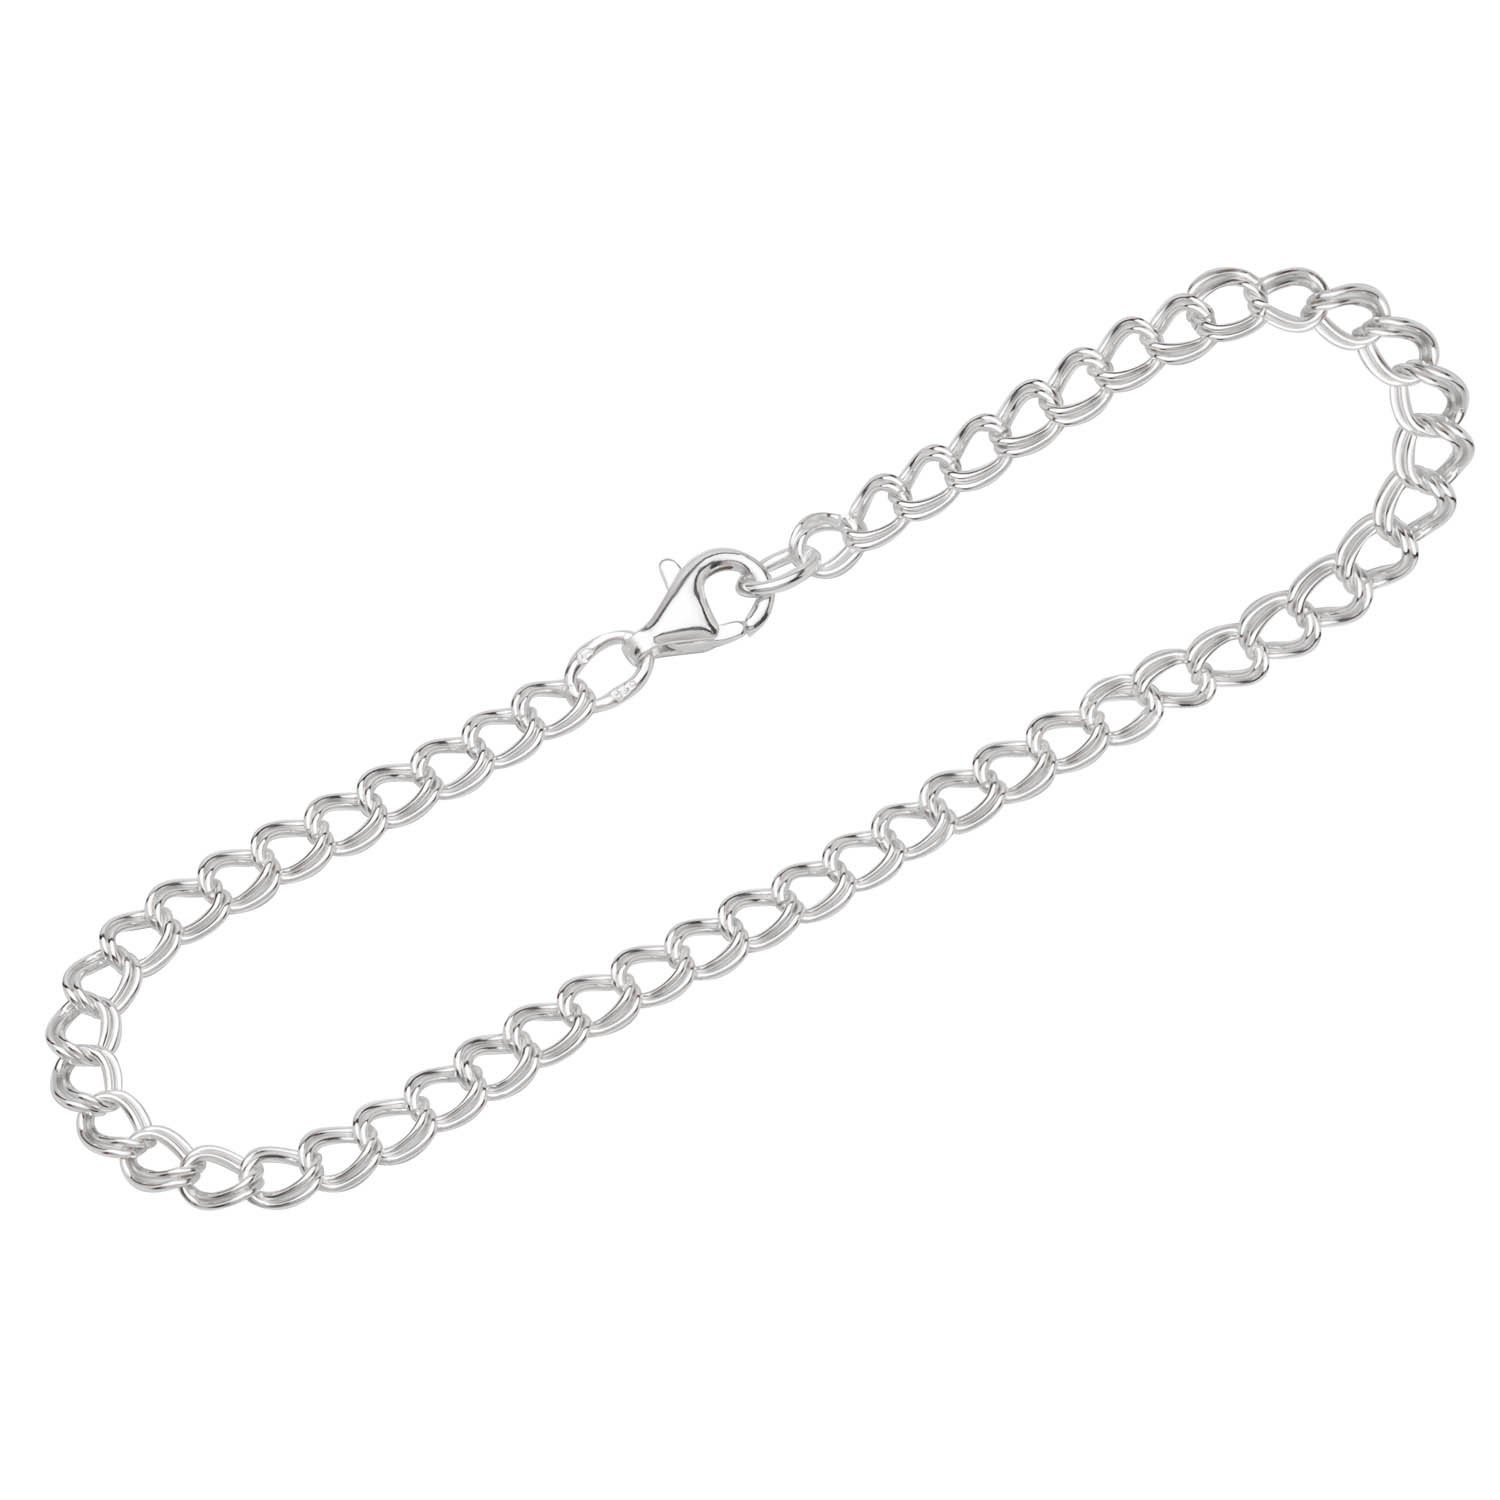 NKlaus Silberarmband Armband 925 Sterling Silber 19cm Zwillings Panzer (1 Stück), Made in Germany